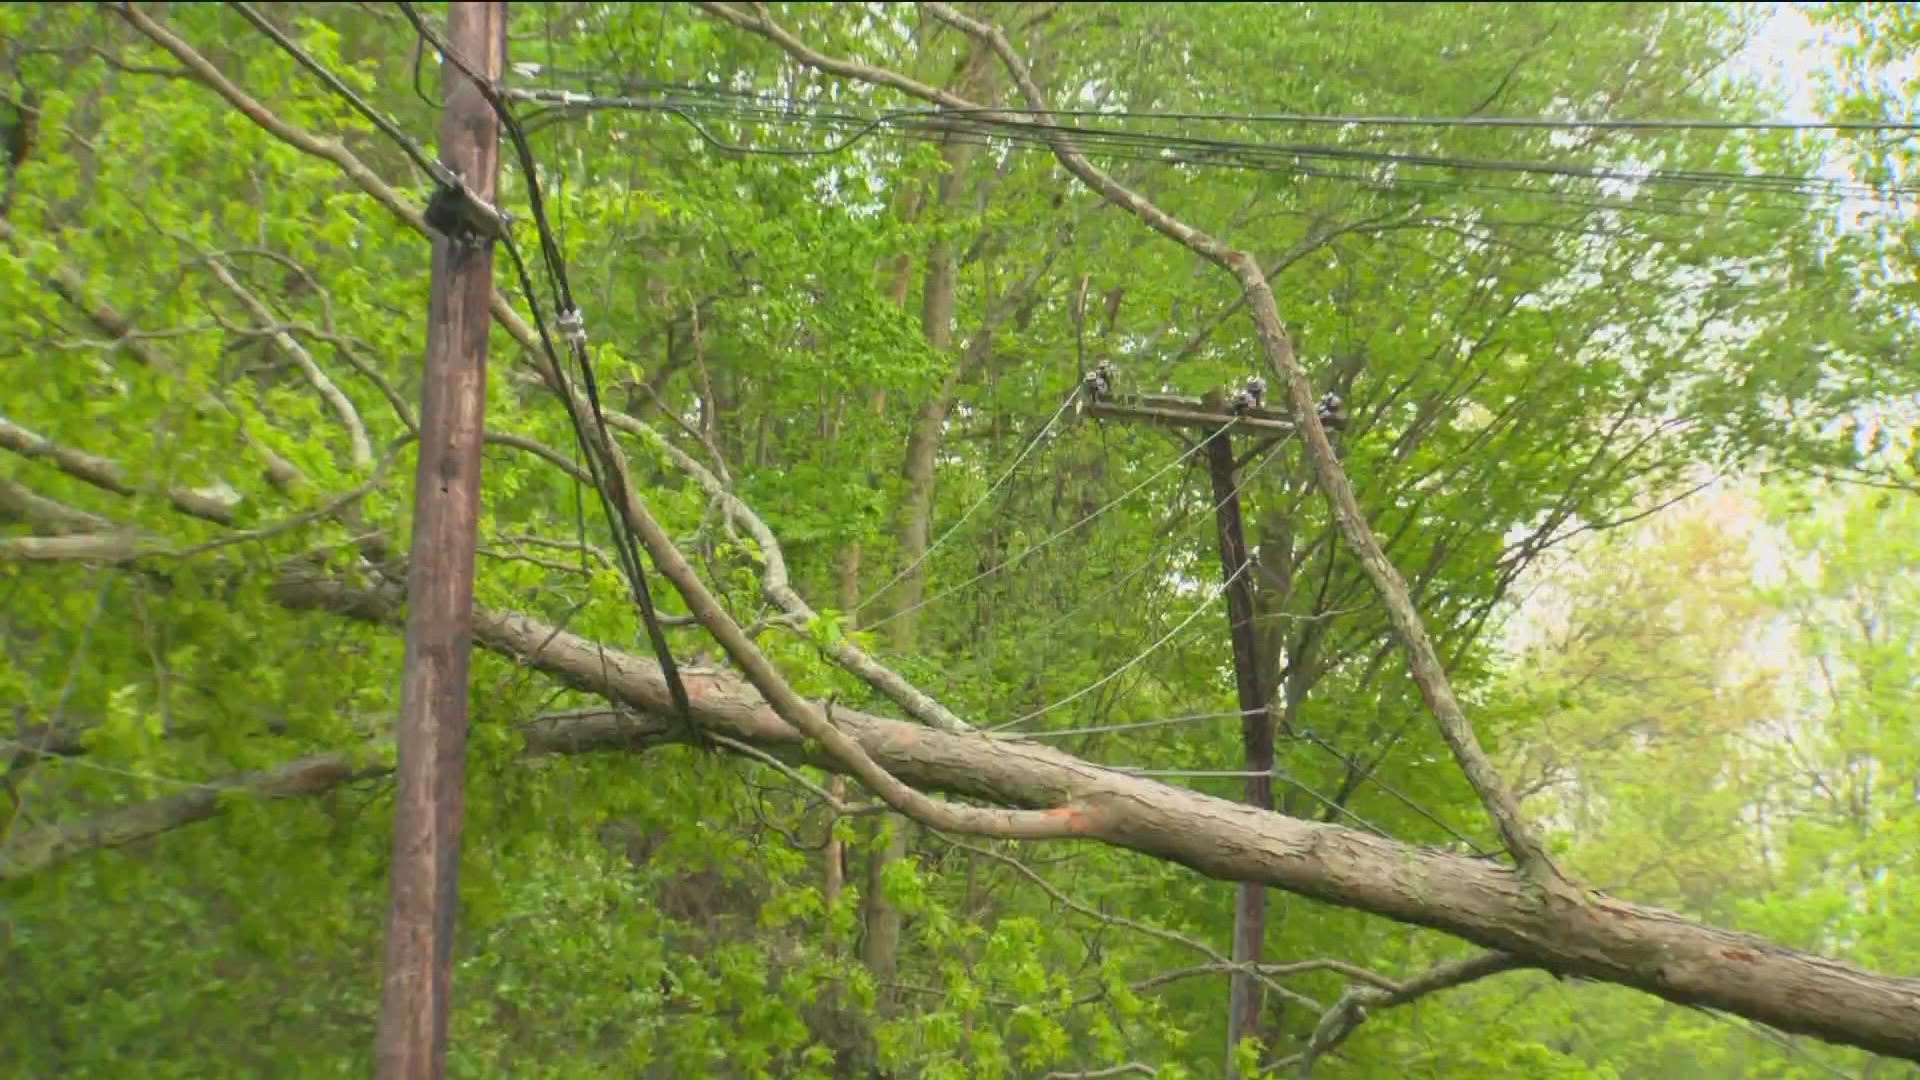 Storms moved through the state causing widespread damage